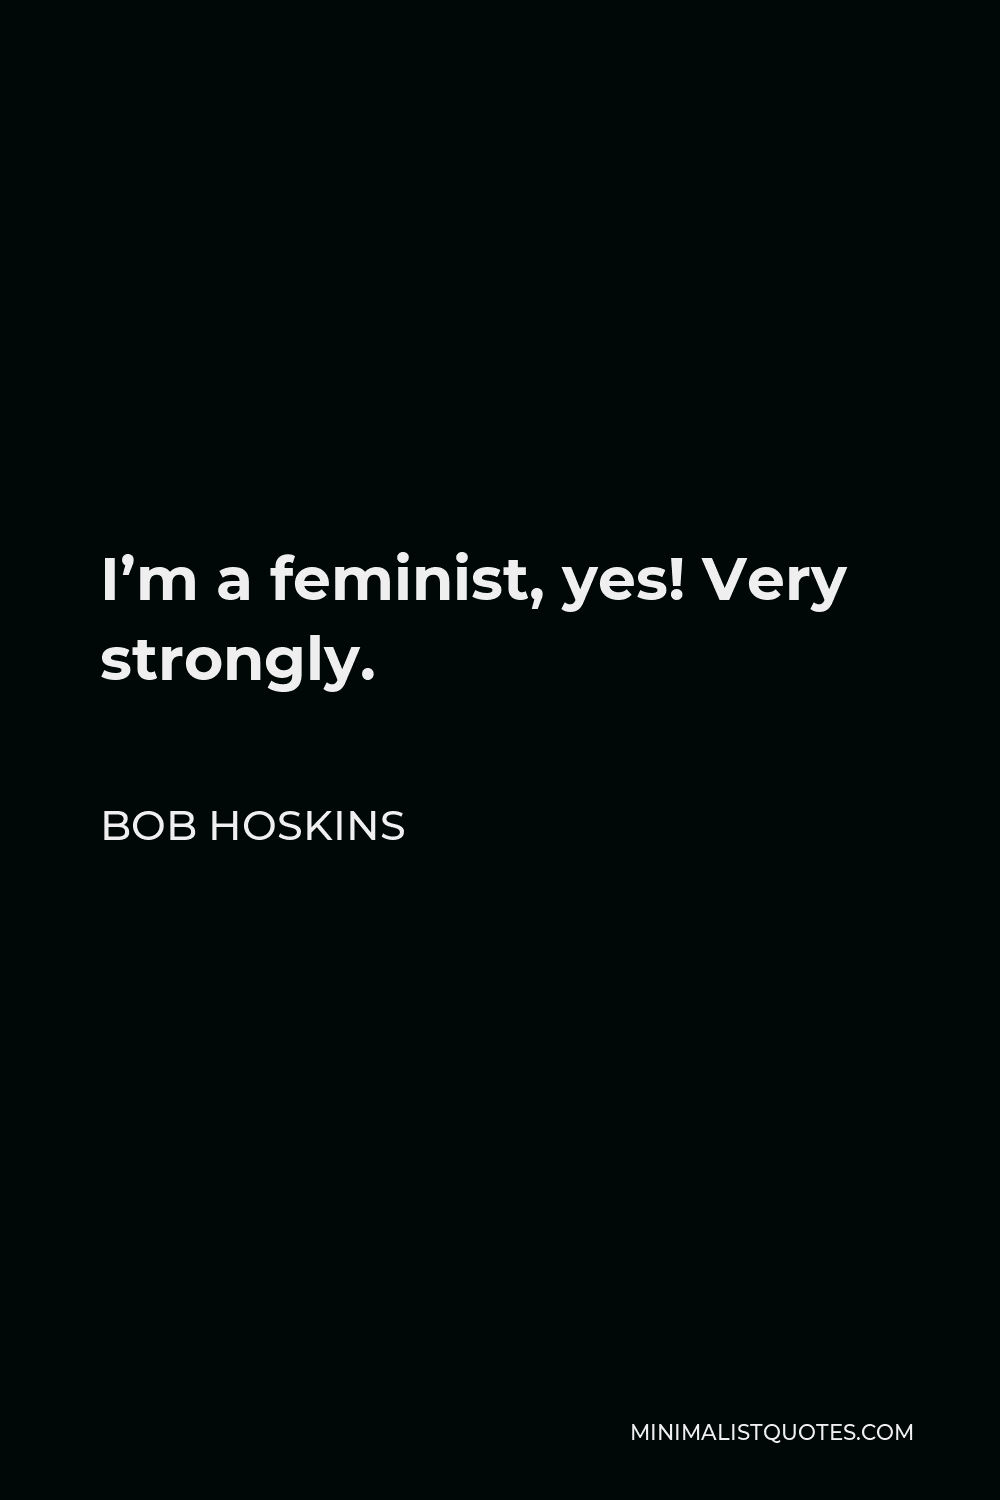 Bob Hoskins Quote - I’m a feminist, yes! Very strongly.